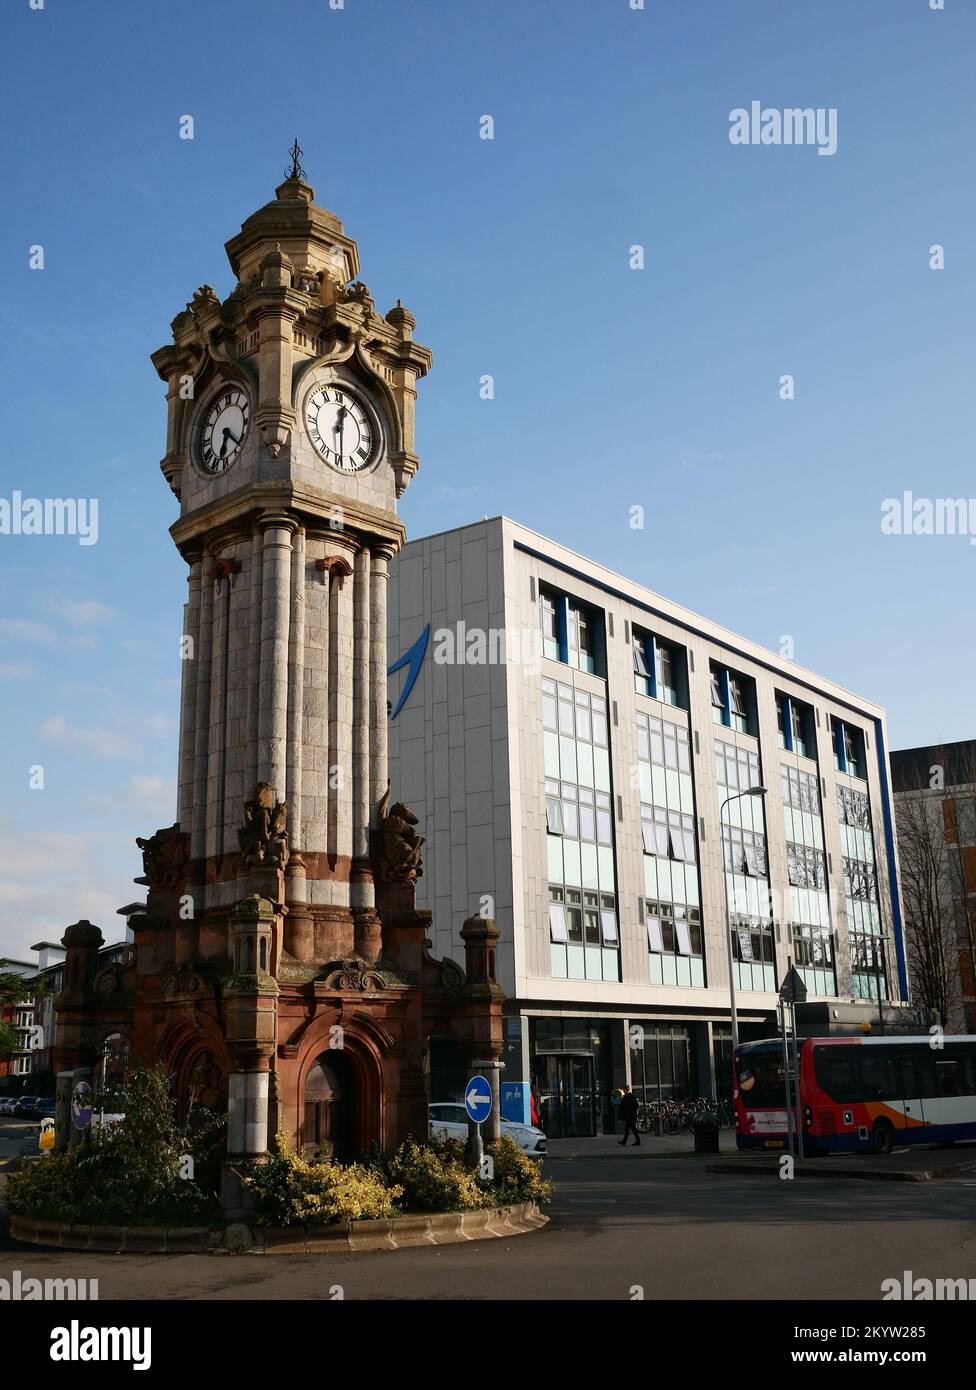 Miles Clock Tower.in Exeter city centre at the junction of Queen Street, Elm Grove Road and New North Road. Exeter, Devon UK Stock Photo